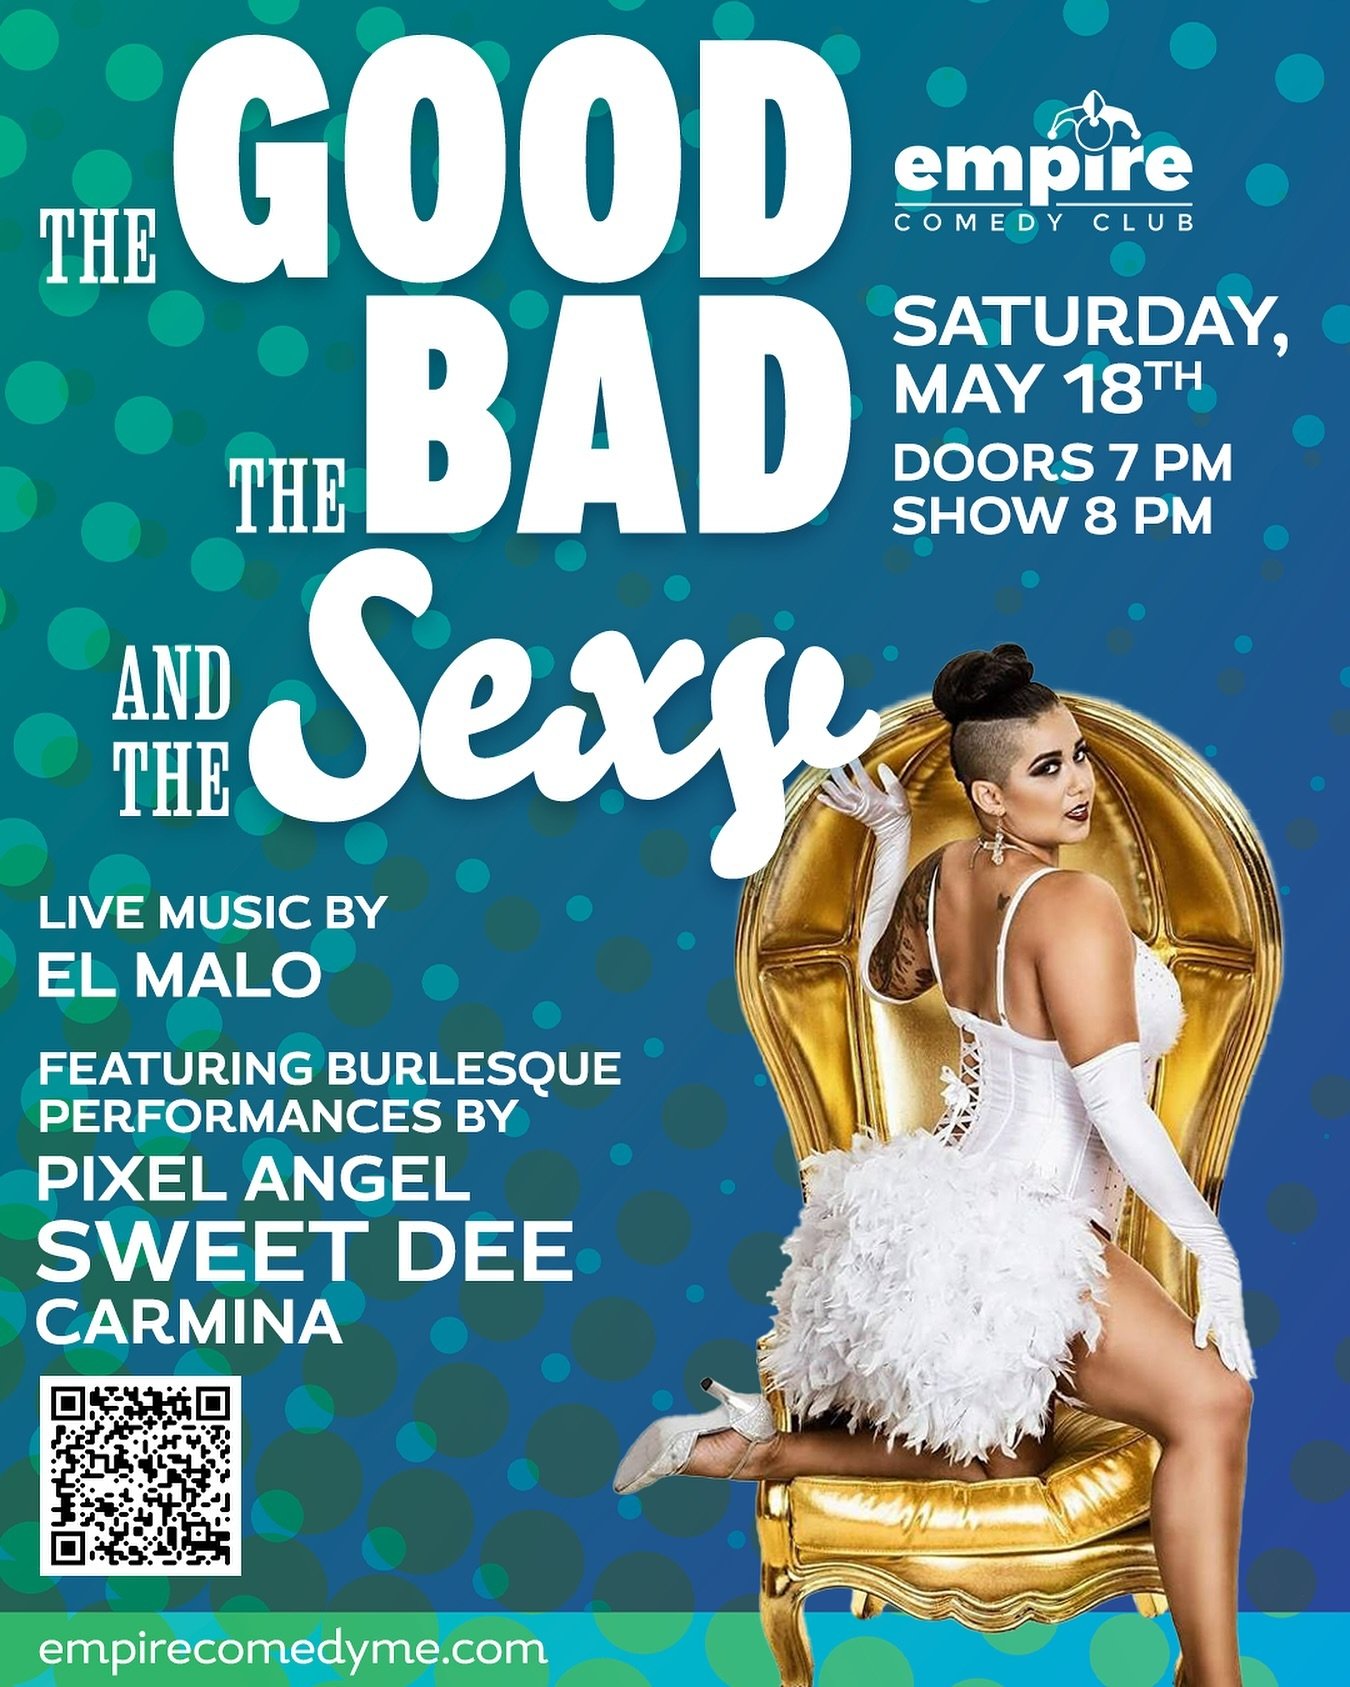 TOMORROW, MAY 18TH! Join us for an evening of live music &amp; burlesque! THE GOOD, THE BAD, AND THE SEXY! Doors at 7pm, show at 8pm. 
&bull;
#empirecomedyclub #comedyclub #maine #portlandmaine #thingstodoinmaine #burlesque #maineburlesque #207 #fun 